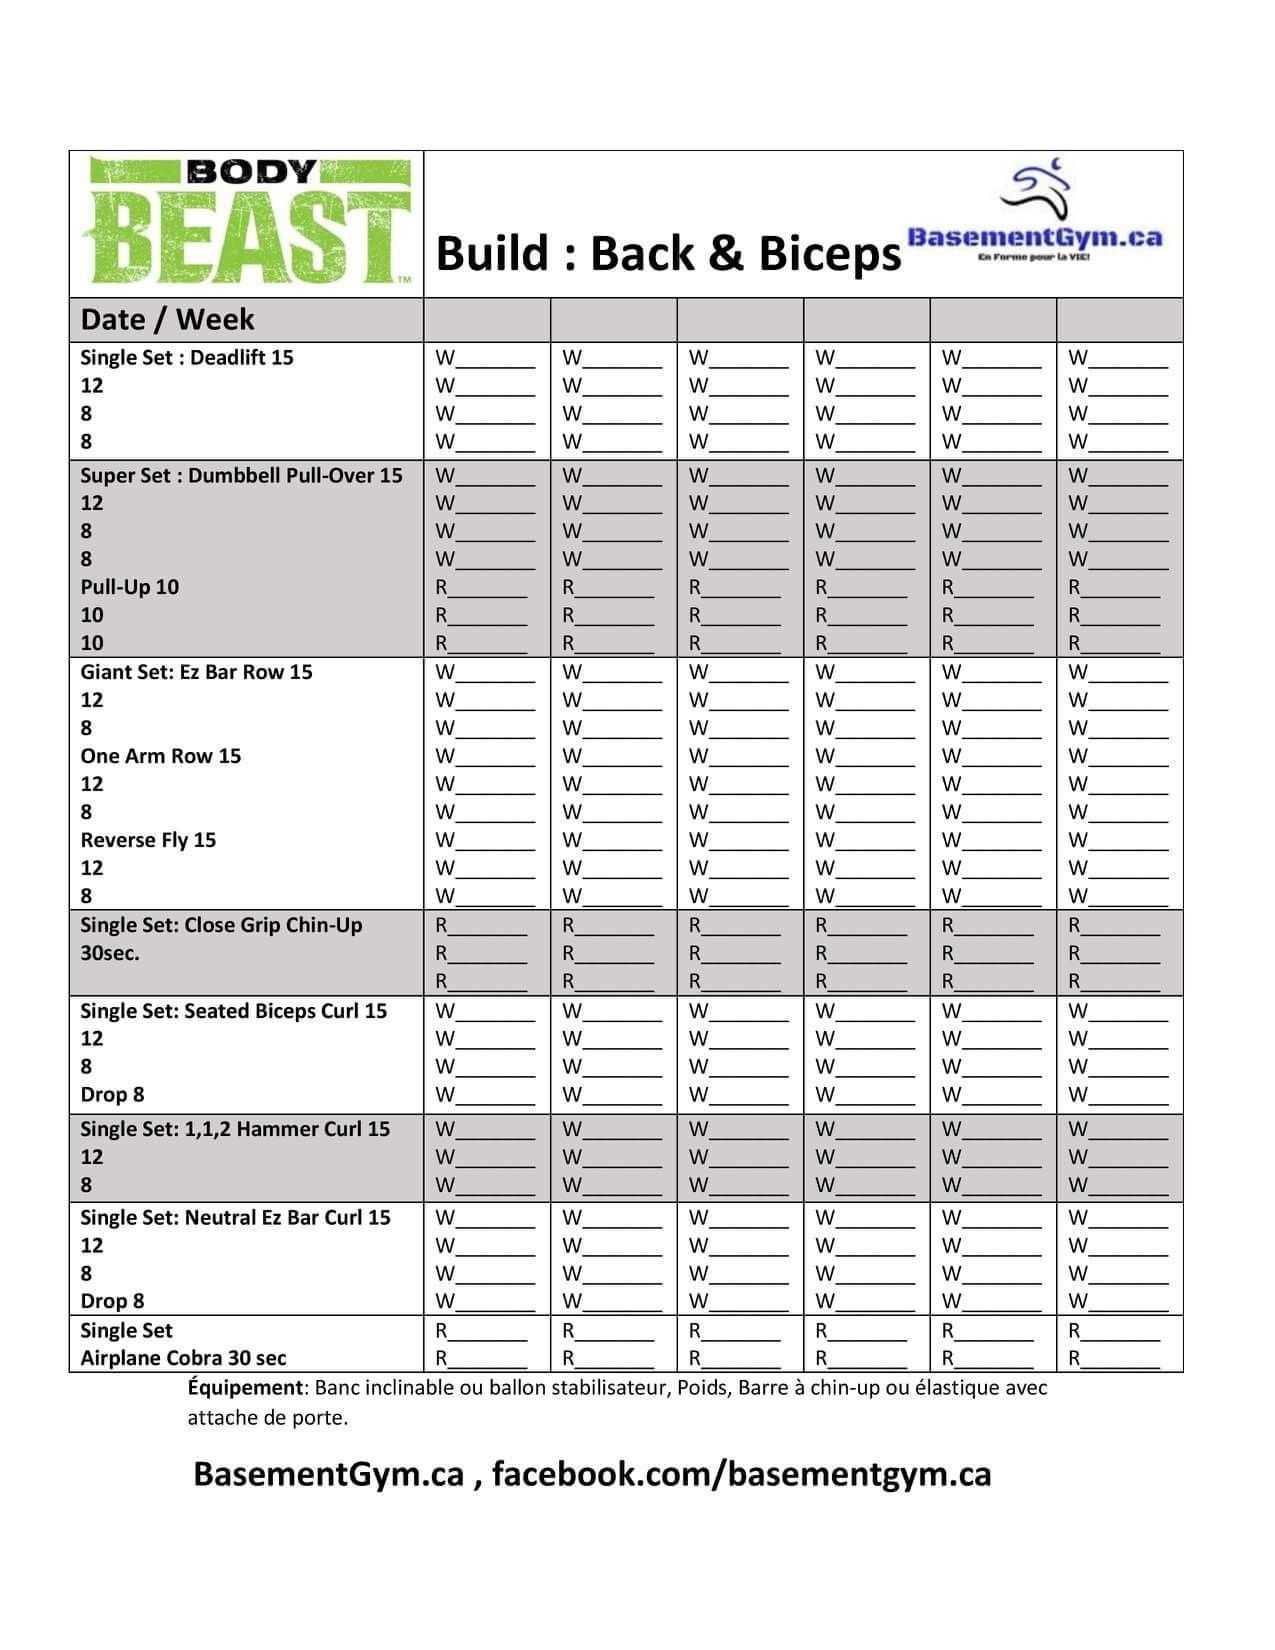 Body Tissues Worksheet together with Body Beast Build Back & Biceps Worksheet